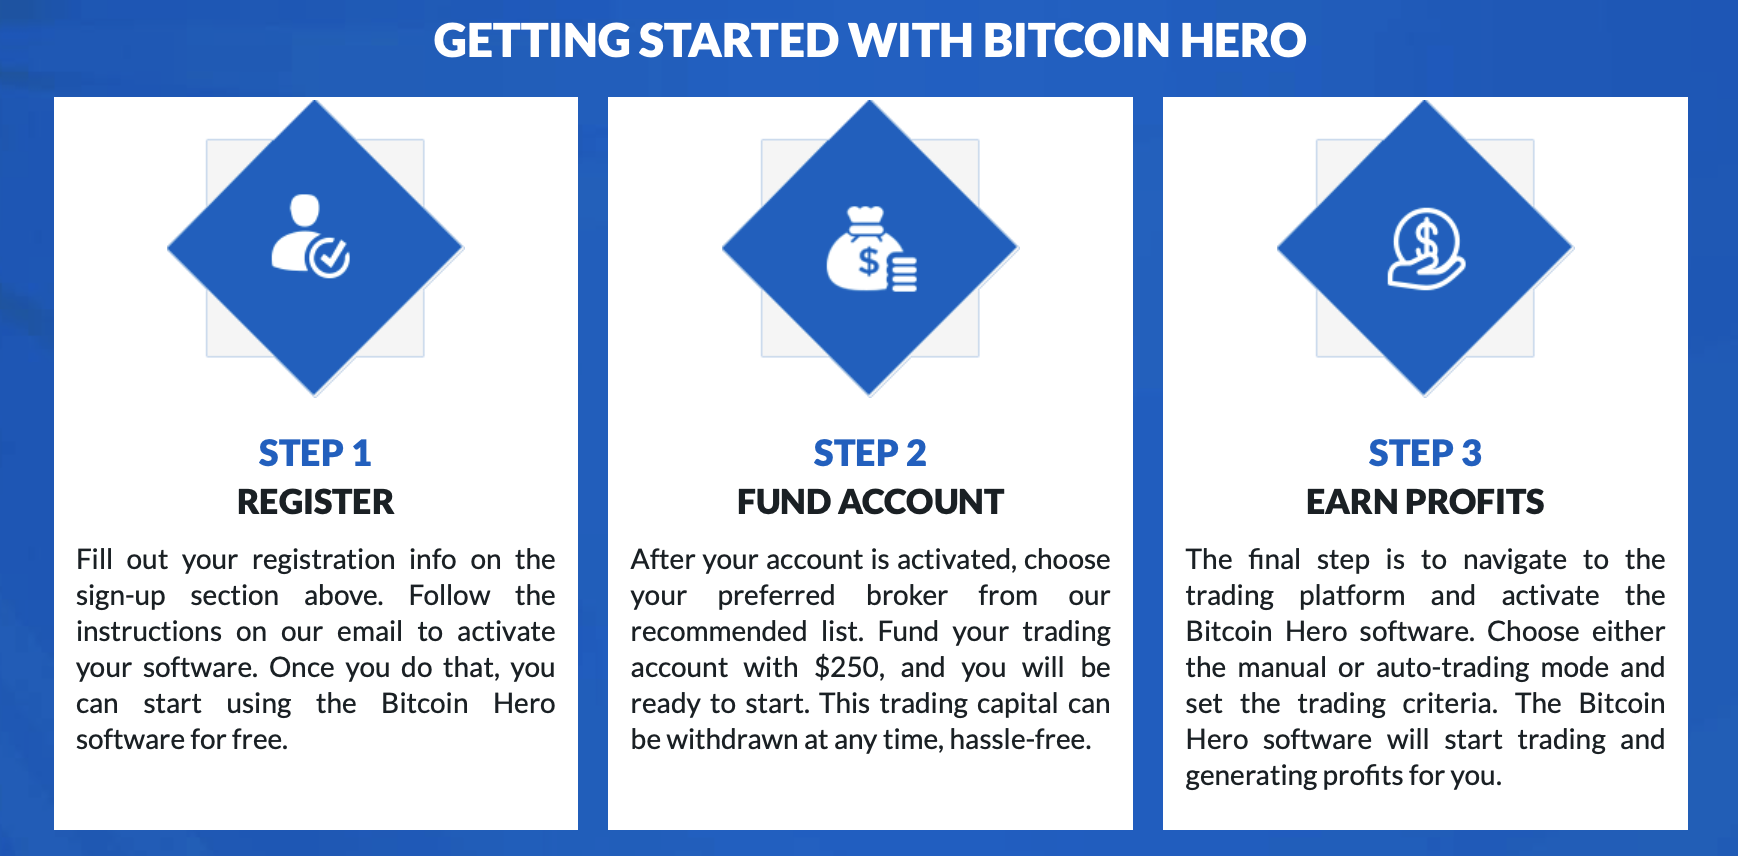 How to get started with Bitcoin Hero